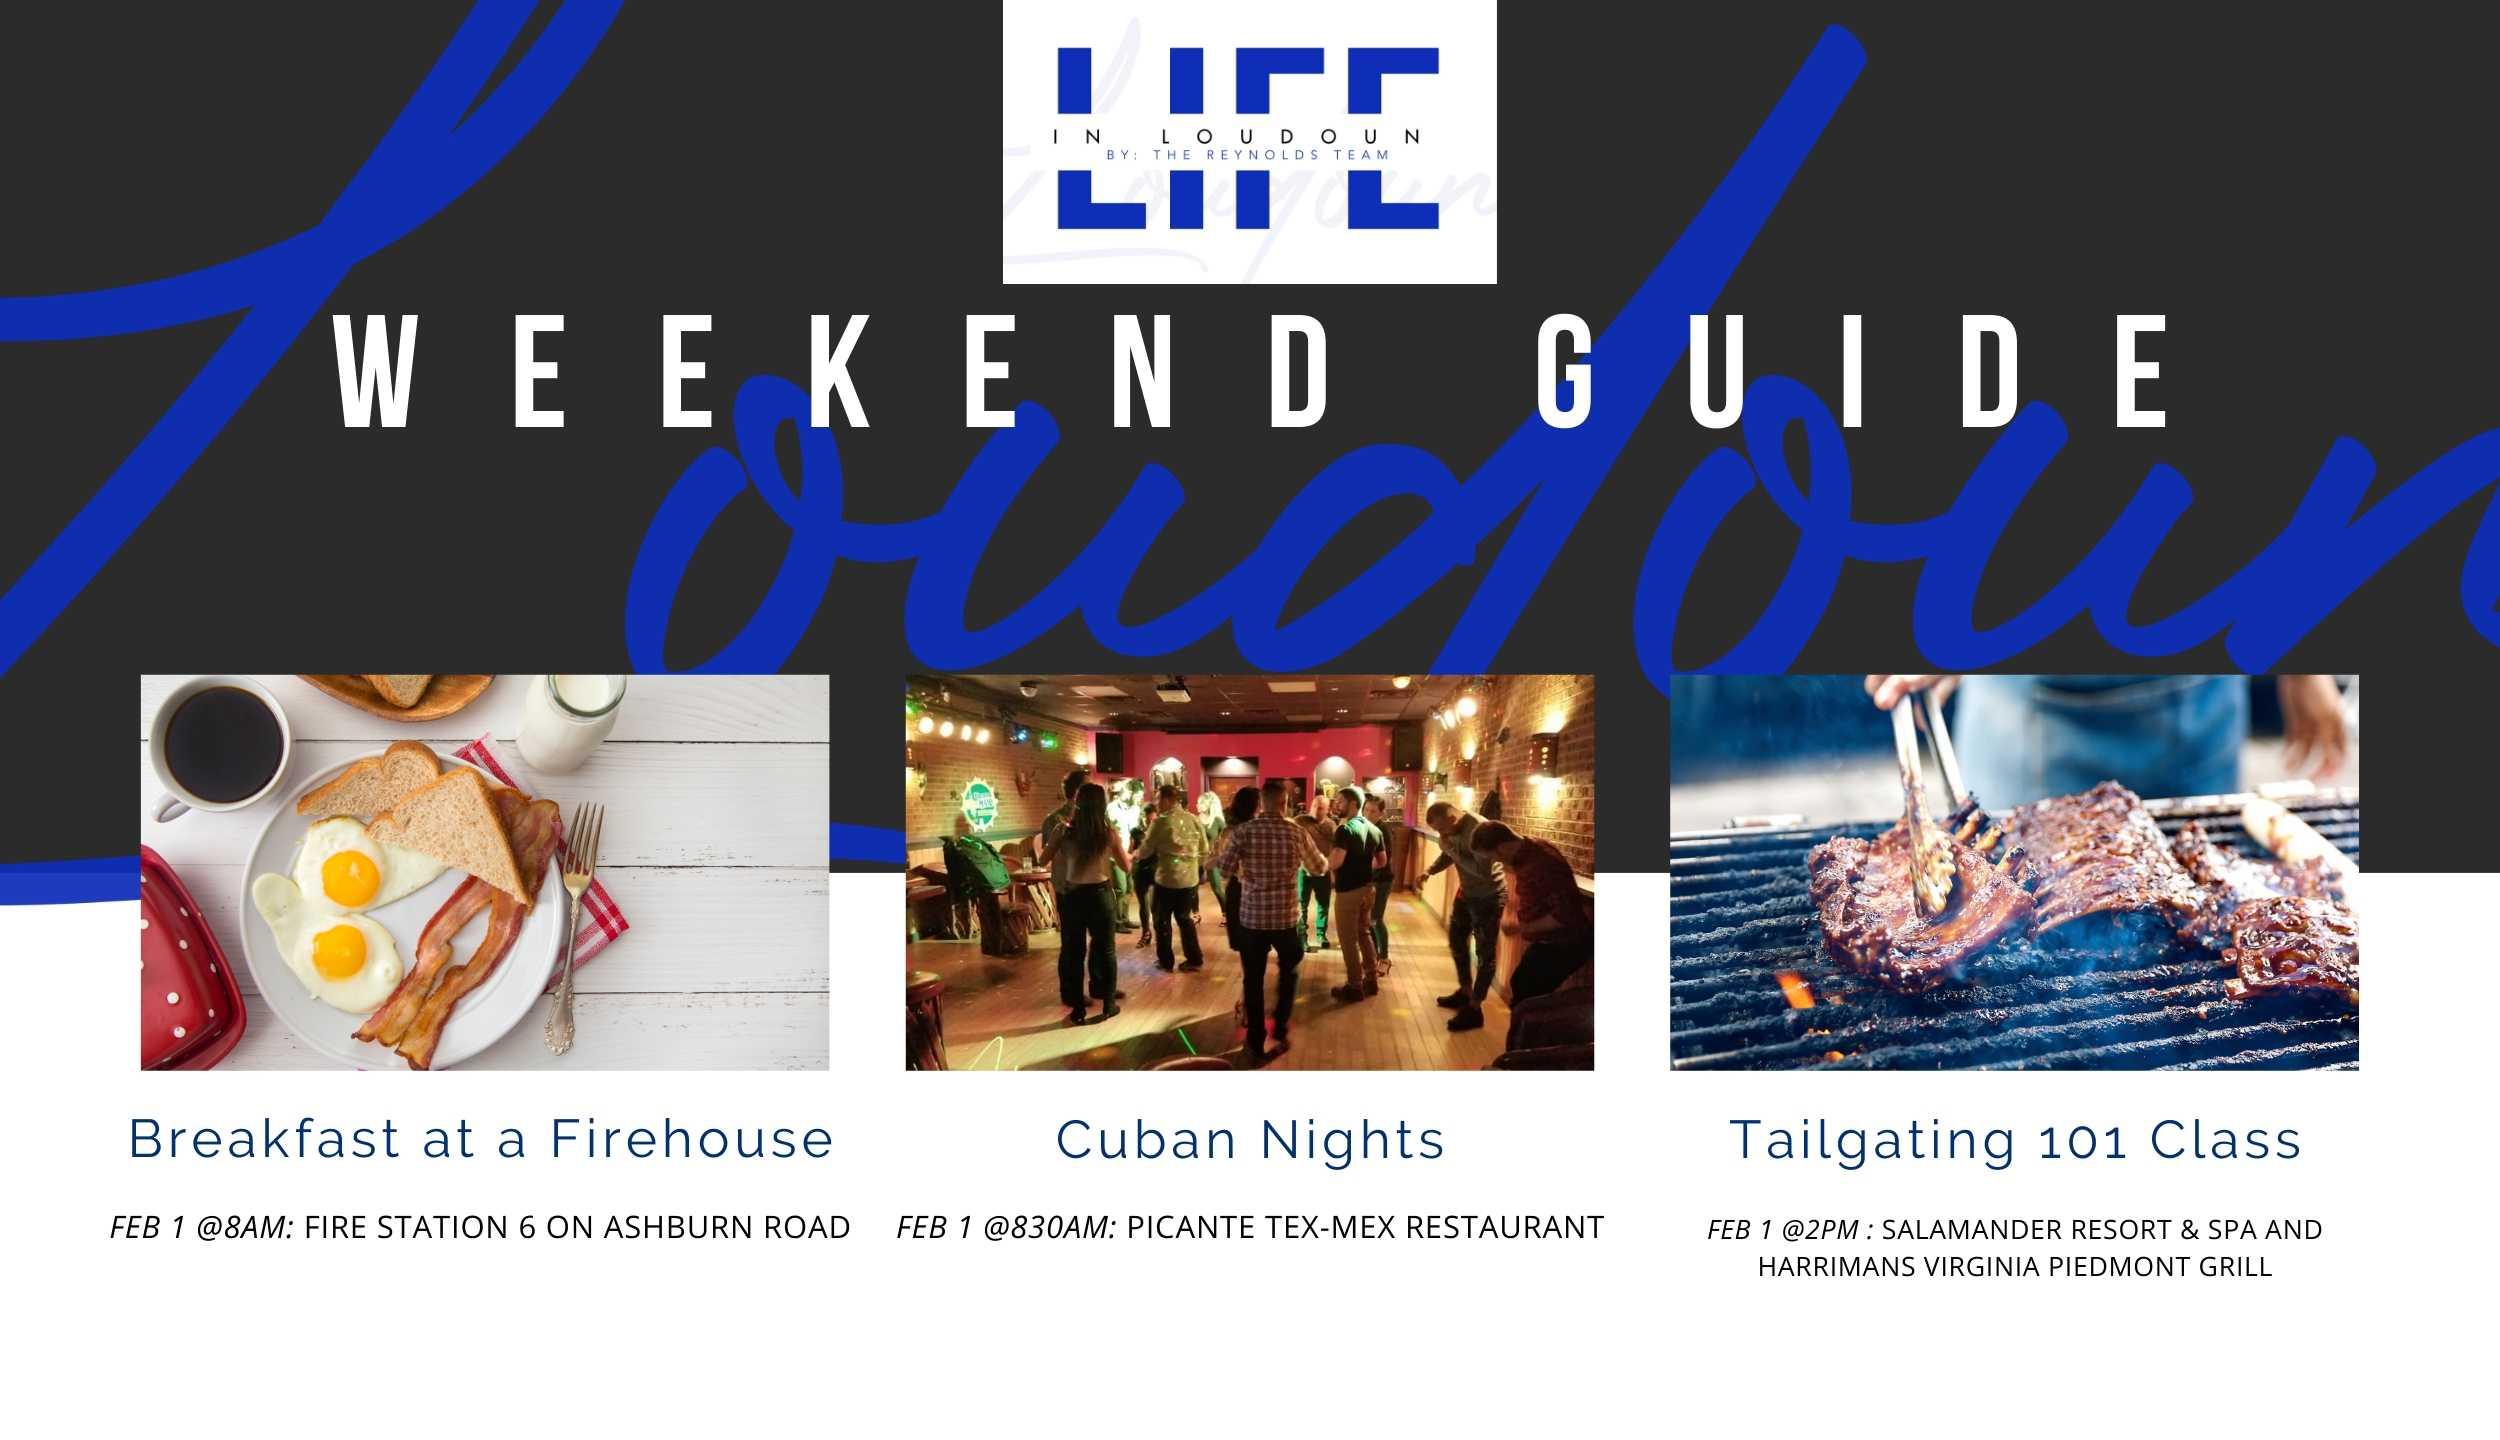 Weekend Event Guide in Loudoun County for Feb 1st